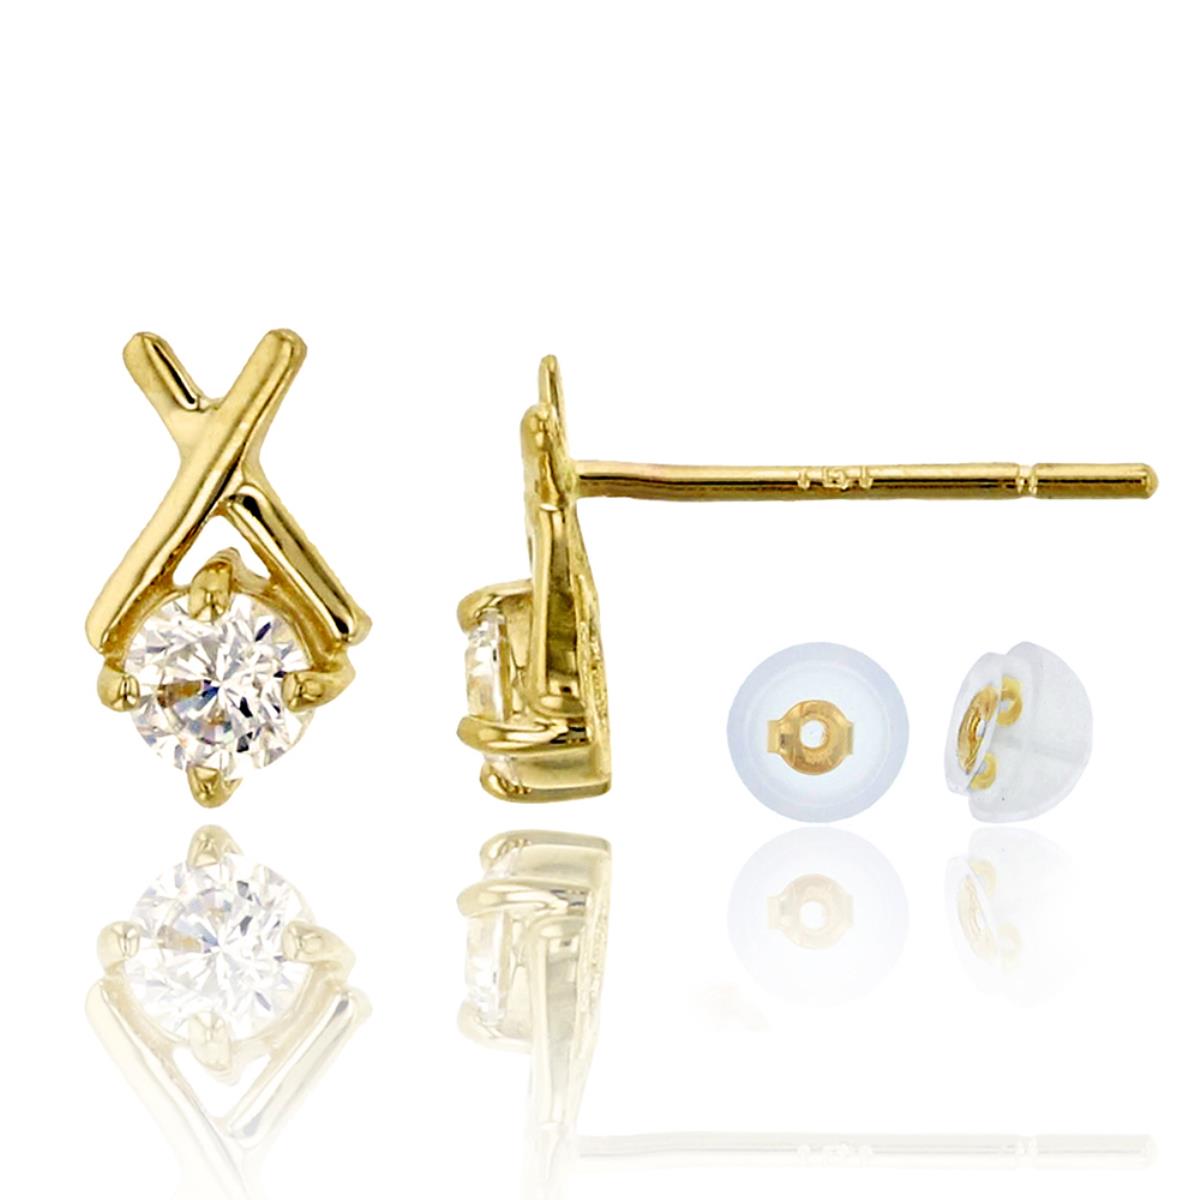 10K Yellow Gold Polished 3mm Rd XO Stud Earring & 10K Silicone Back